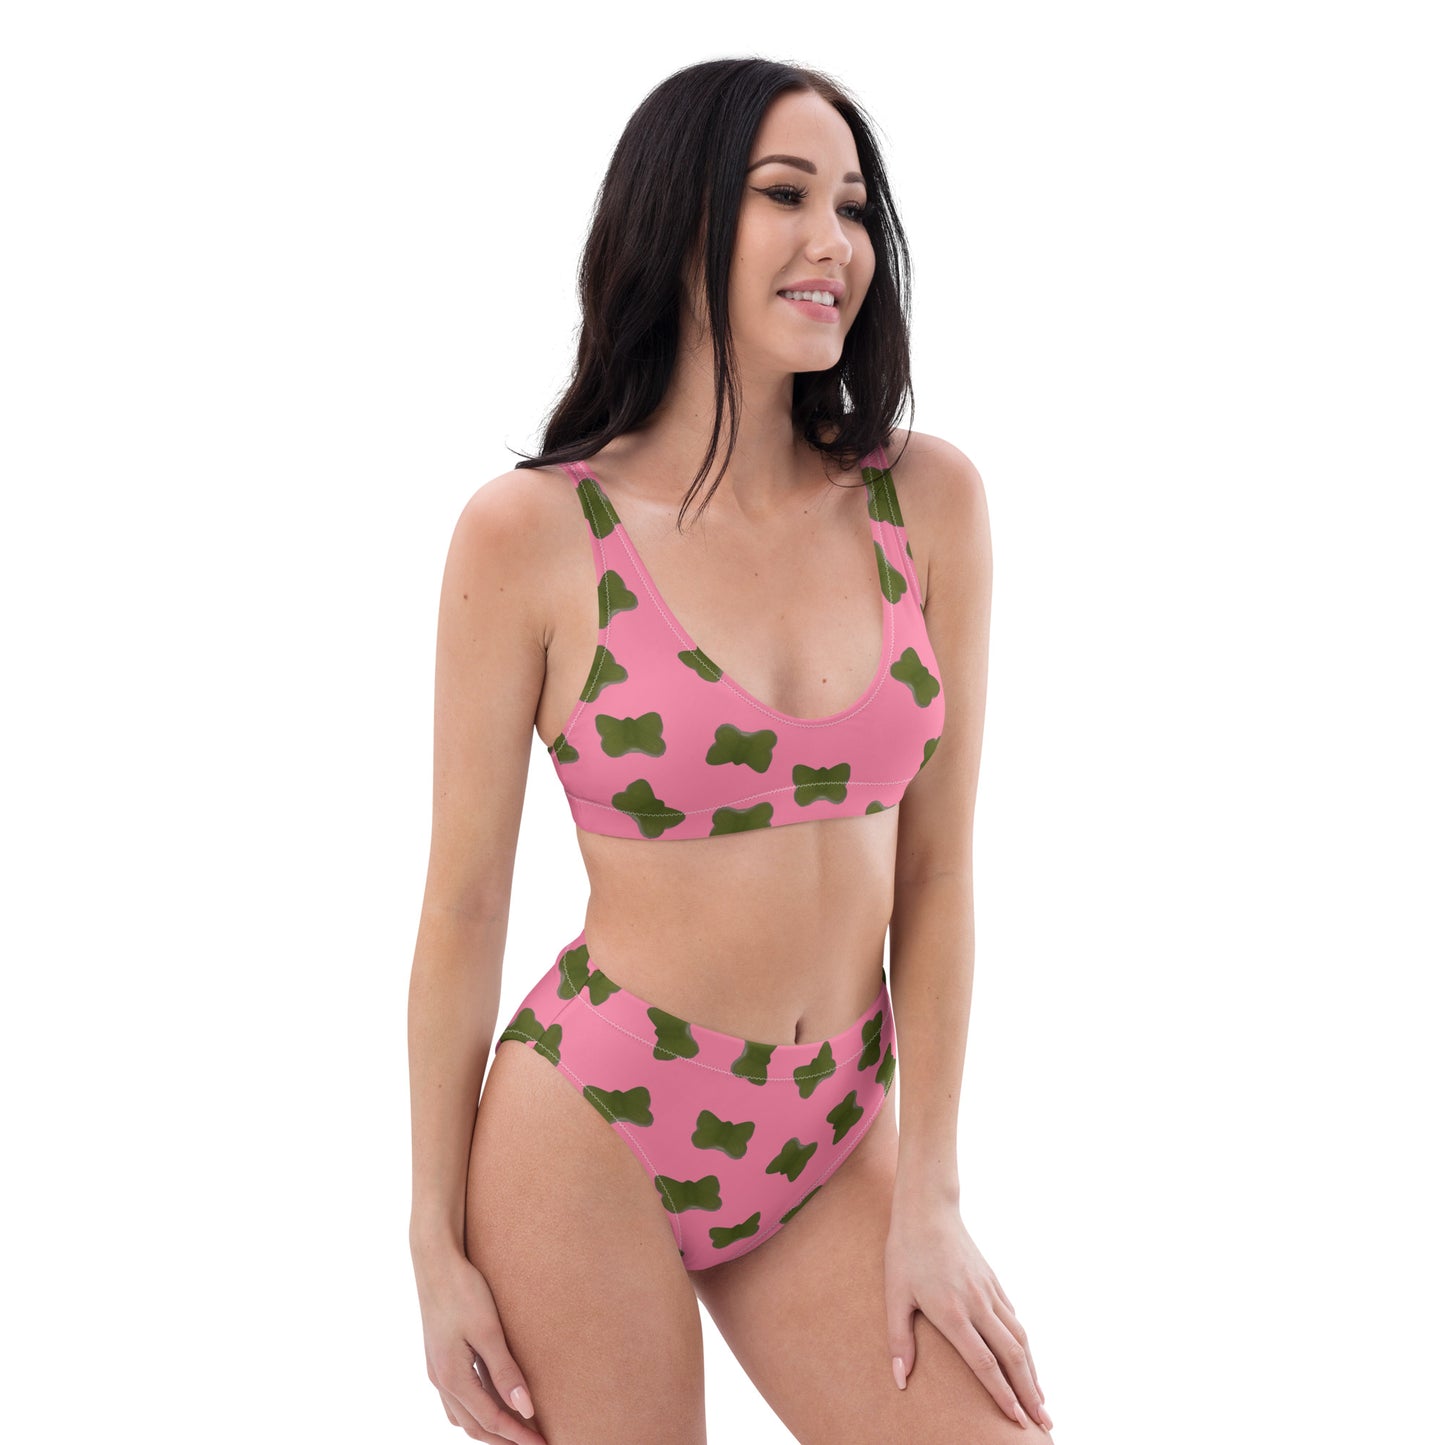 Jelly butterfly - Recycled high-waisted bikini - Pink